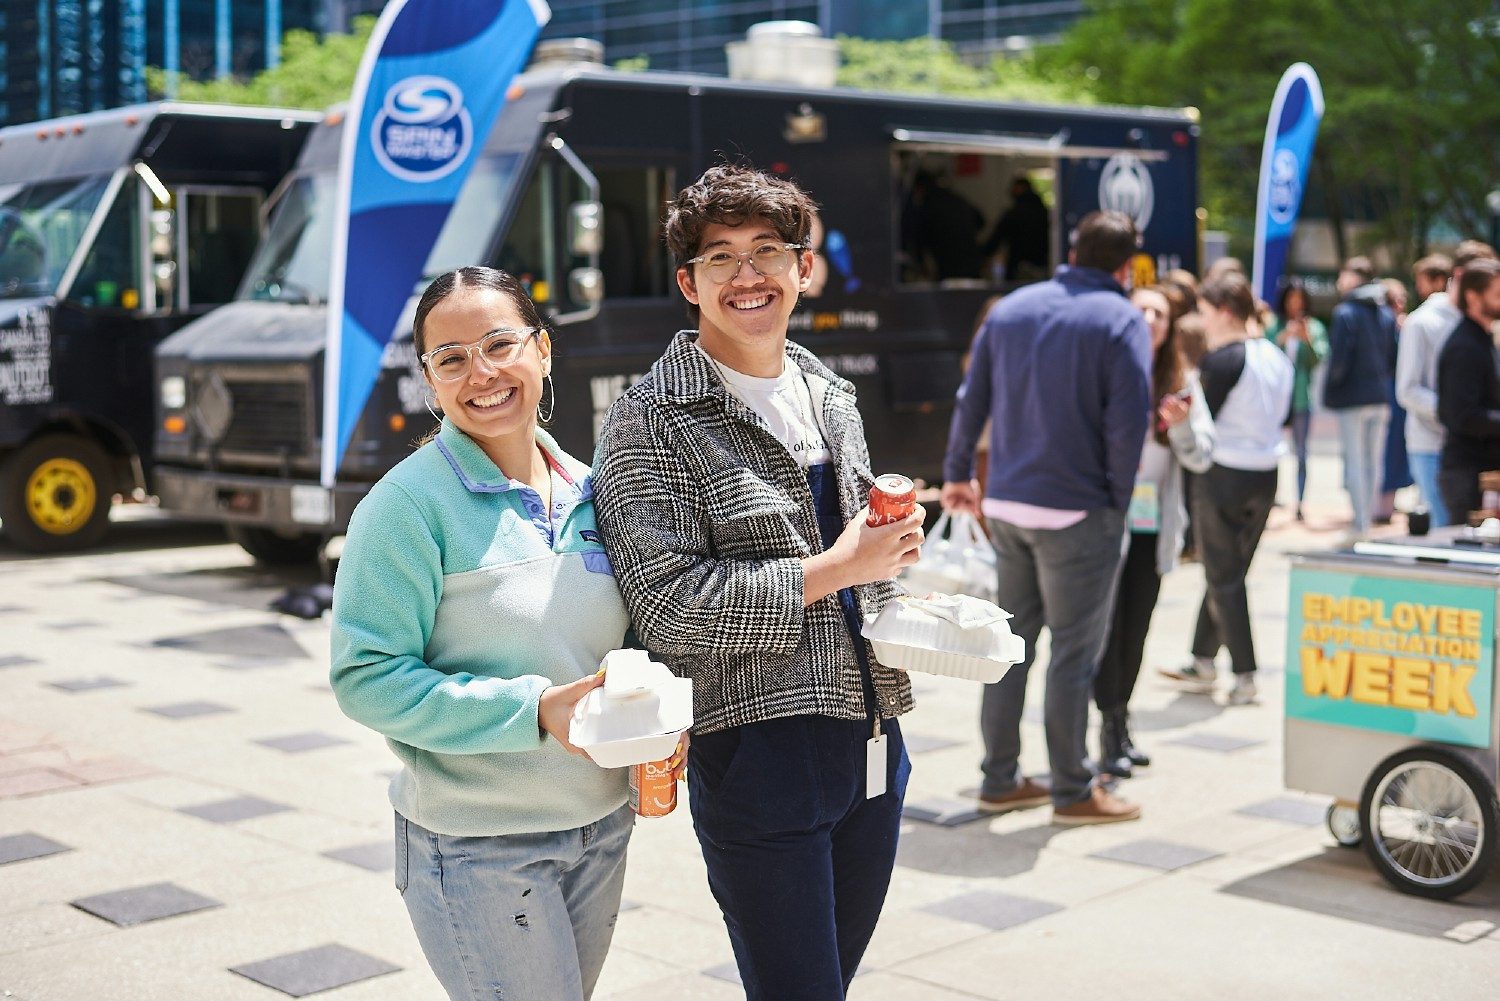 Employee Appreciation Week offers food trucks, games, speakers, yoga, contests, and more for company-wide fun.